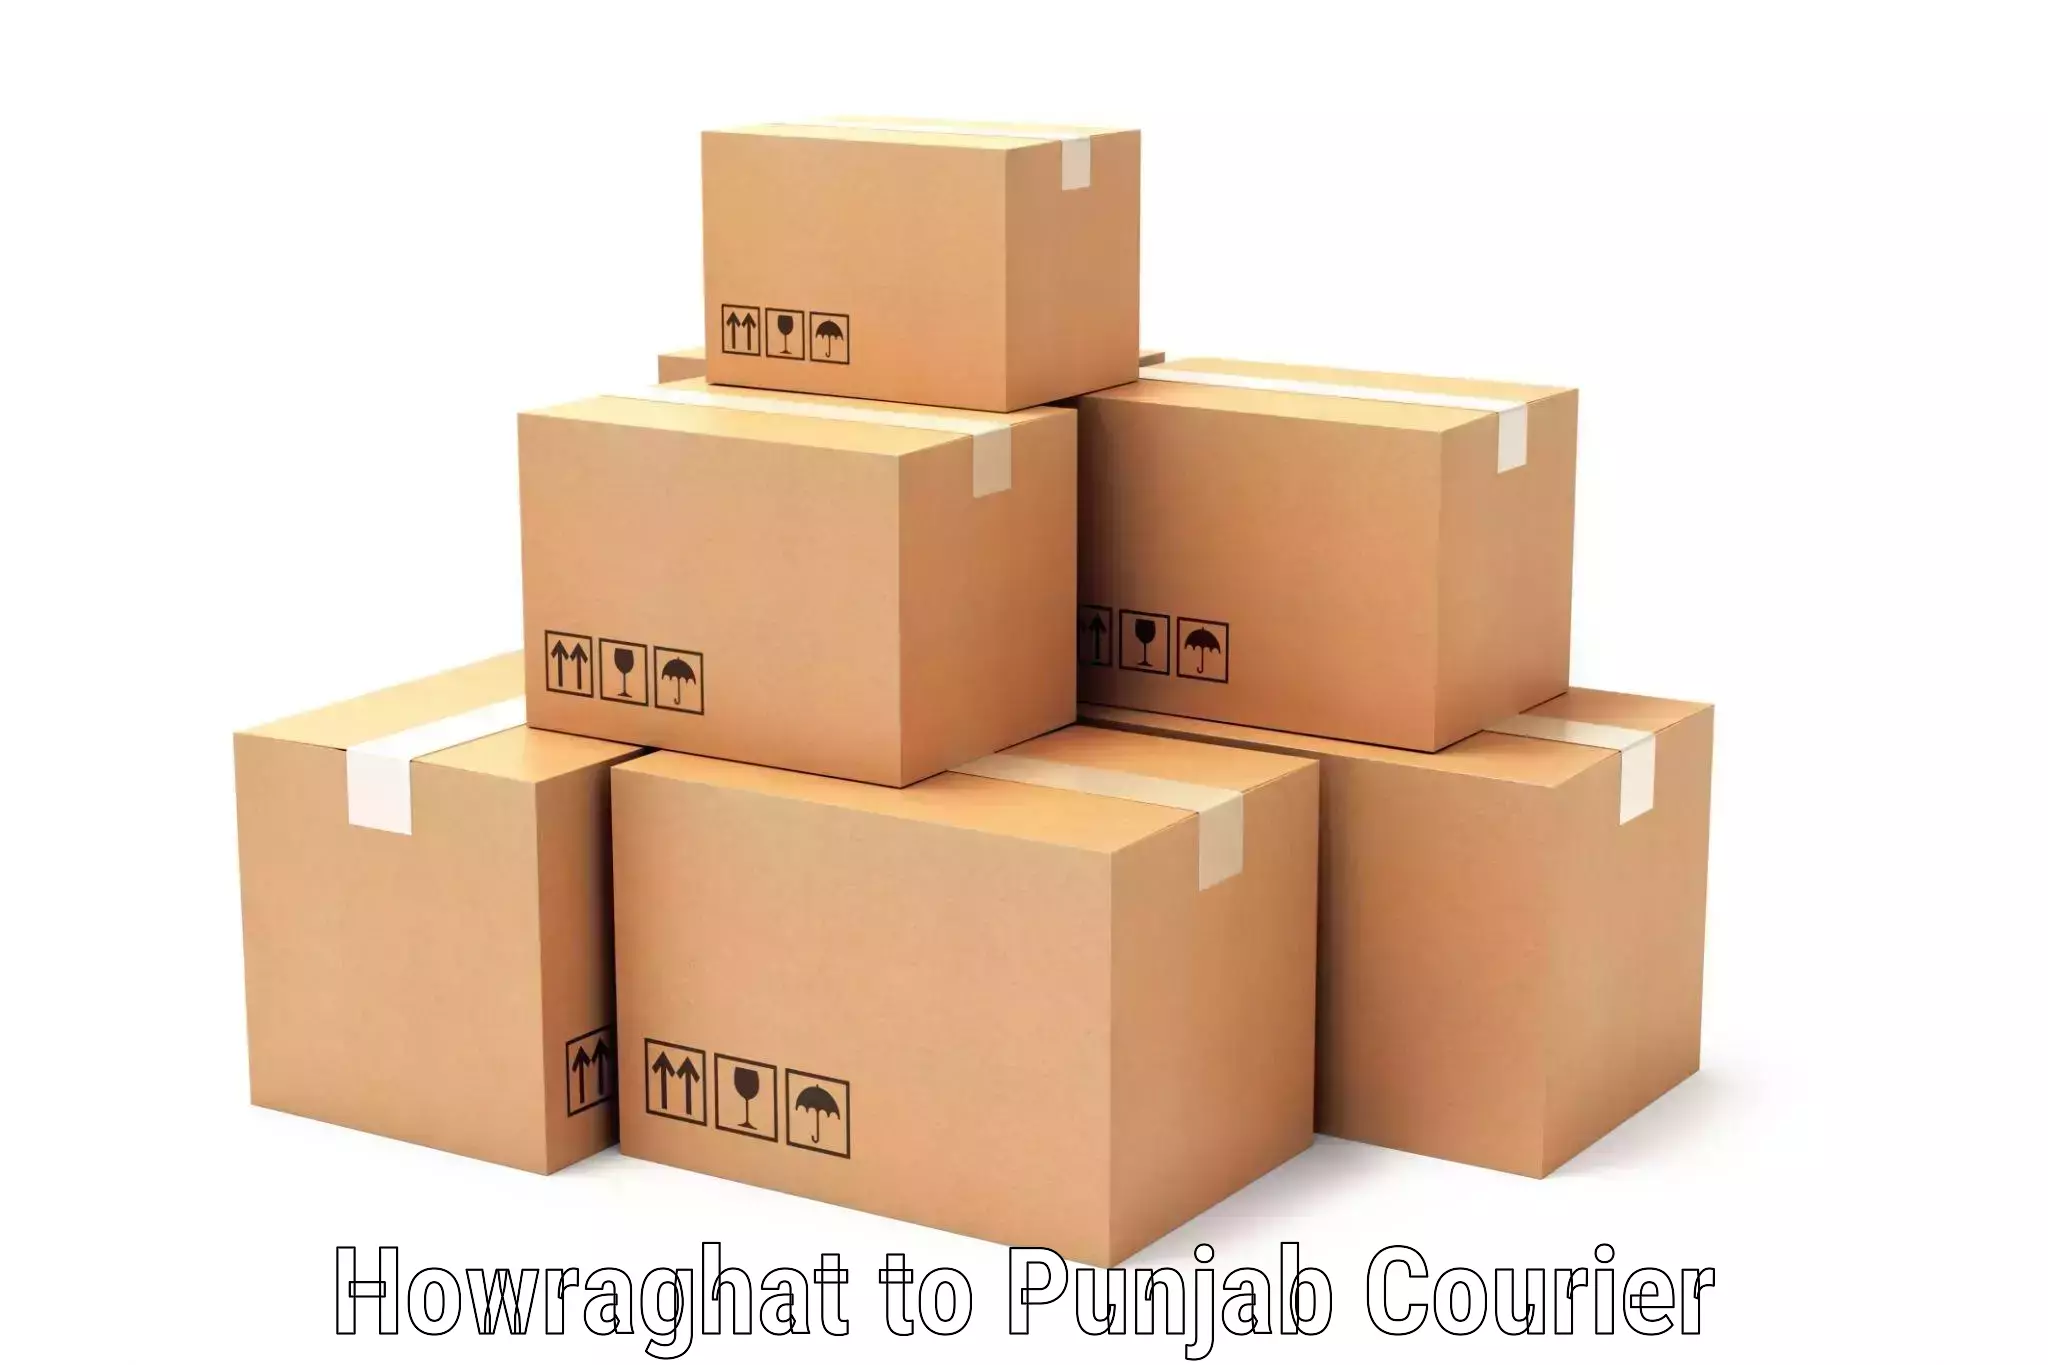 Easy access courier services Howraghat to Phillaur